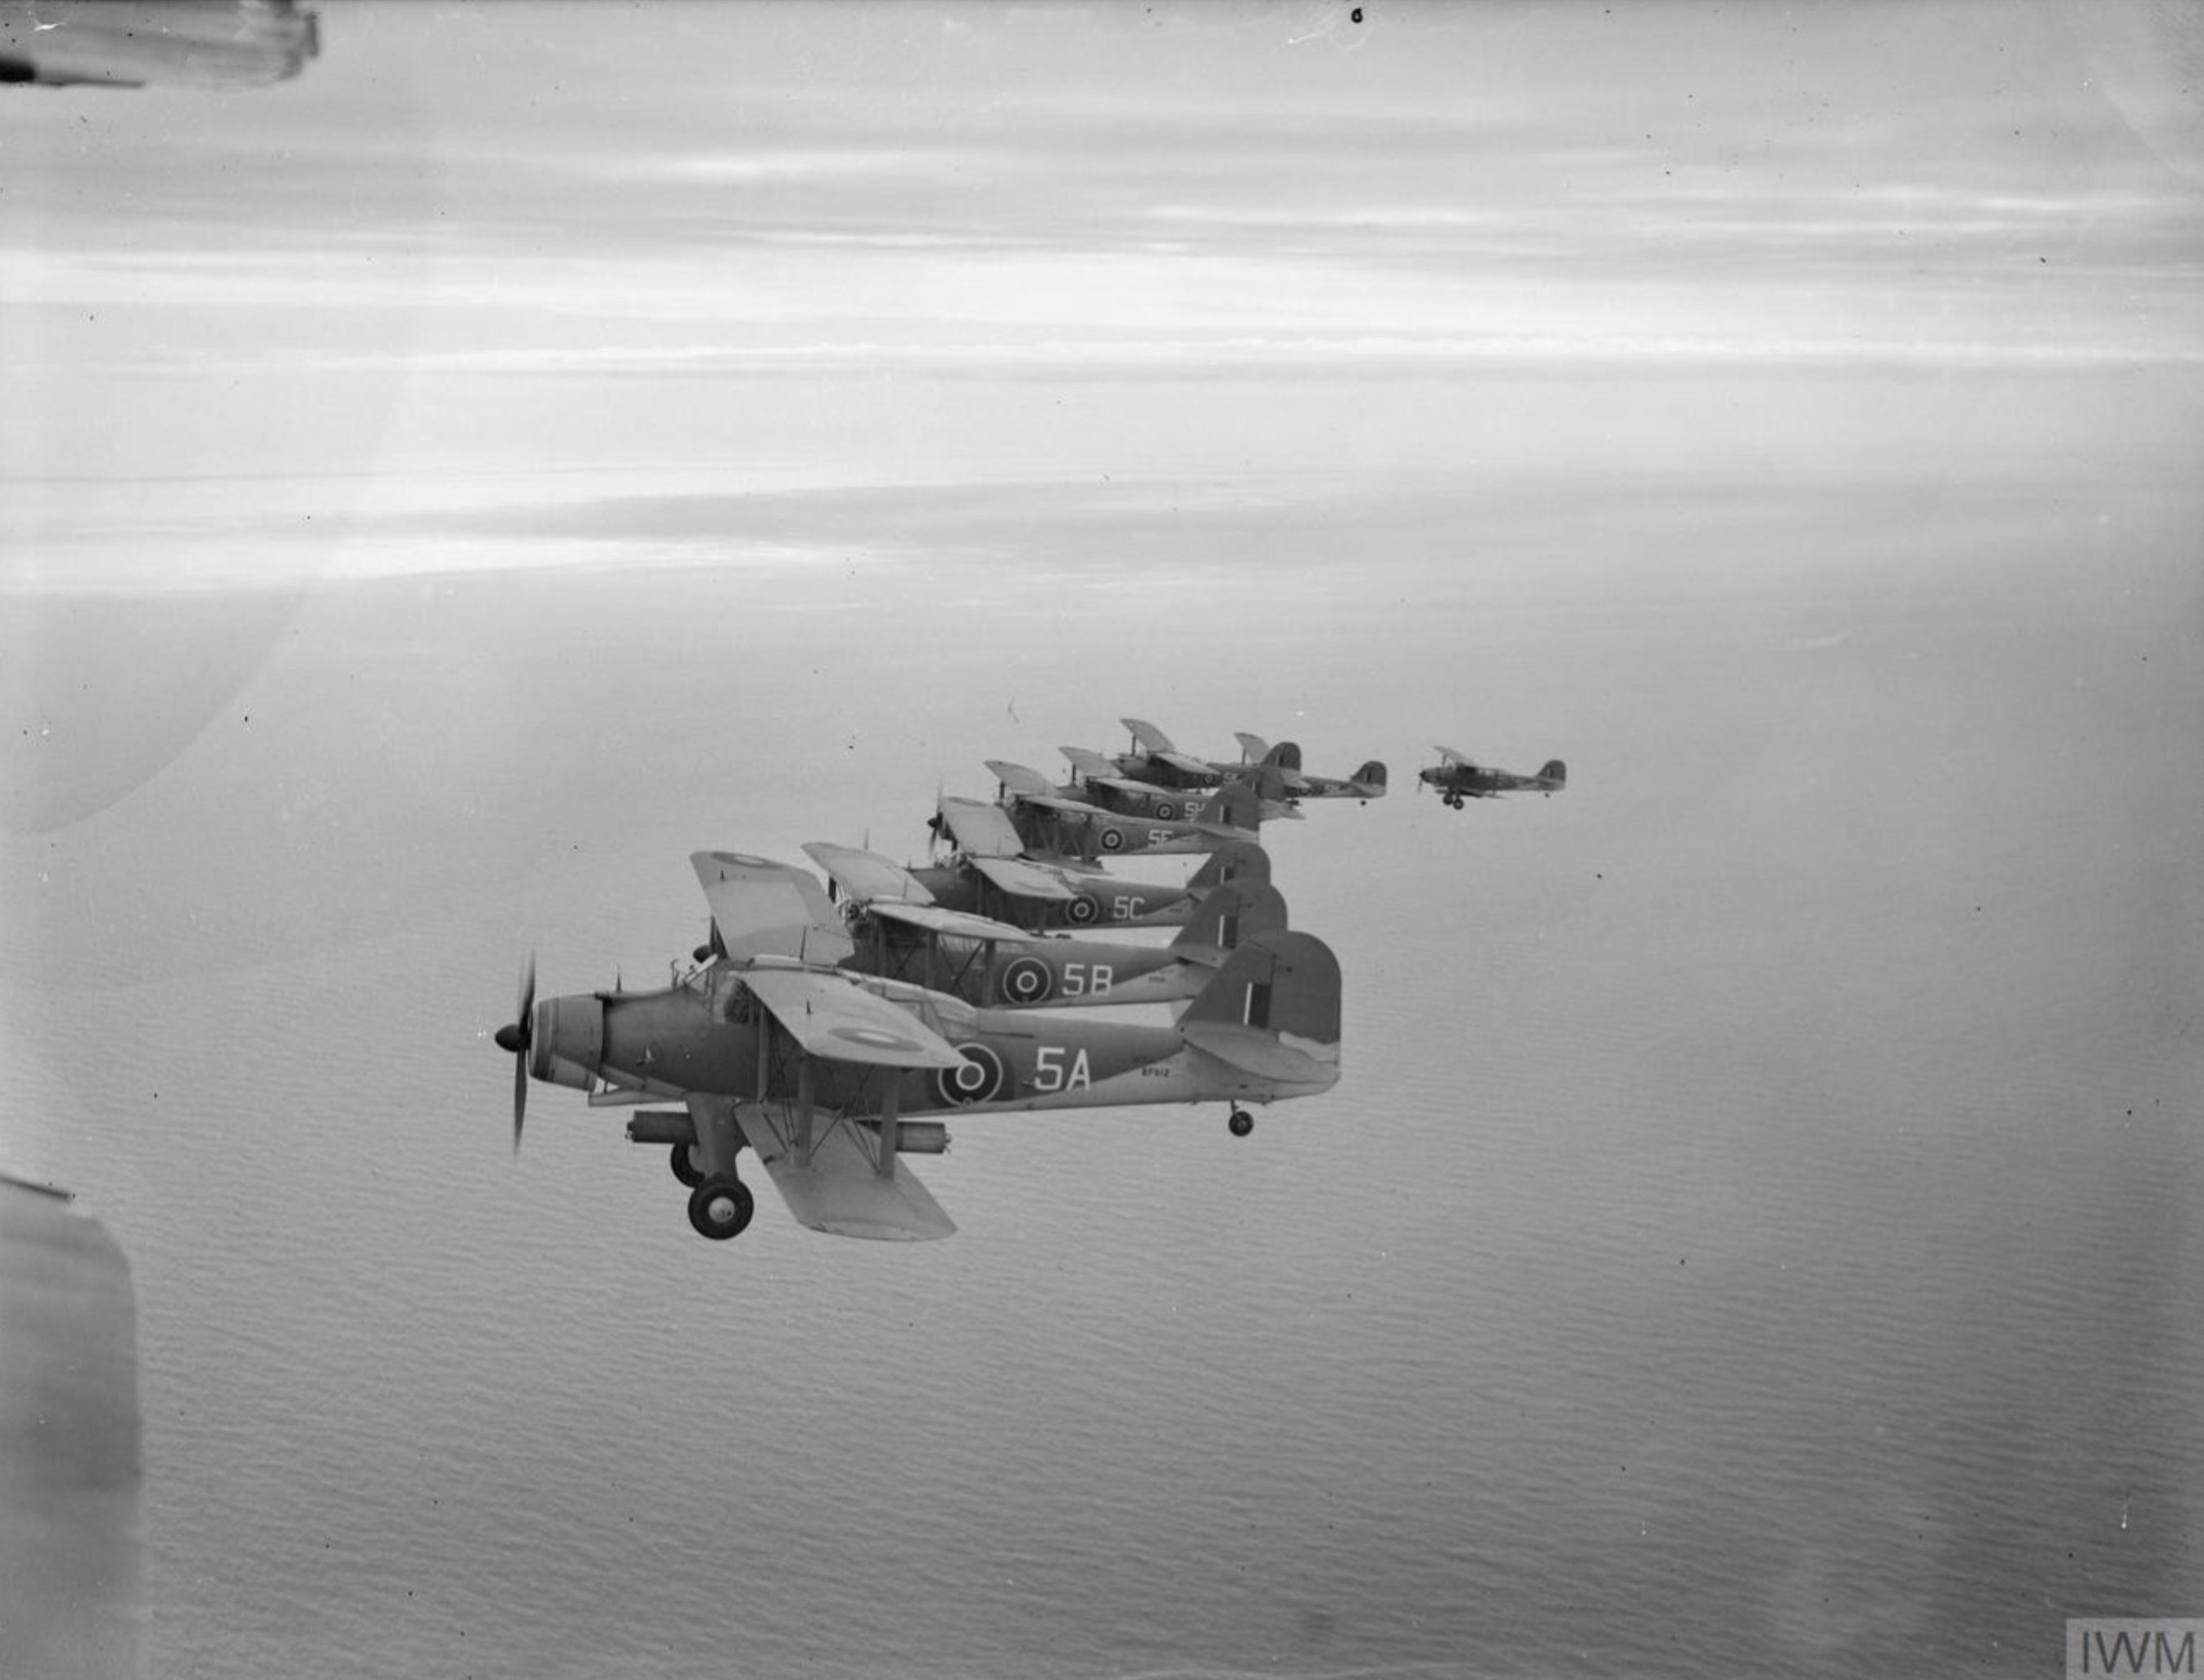 Fleet Air Arm Fairey Albacore starting out on an exercise carrying torpedoes 22nd Jun 1942 IWM A10684